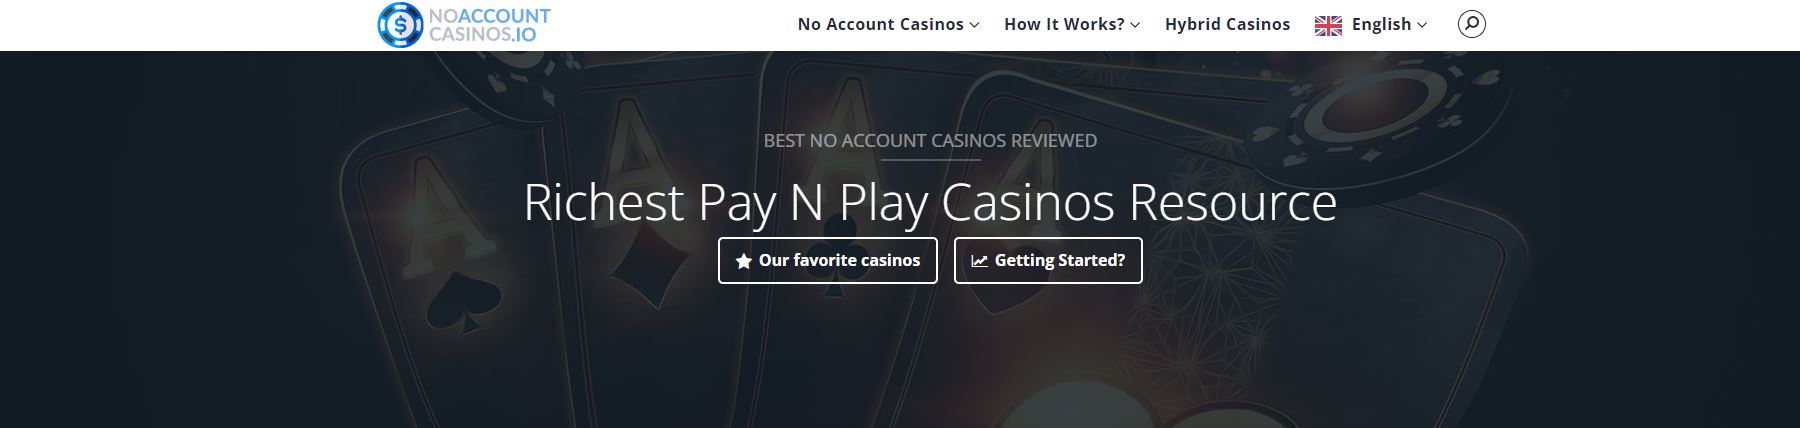 What Are Fast Payout Casinos?